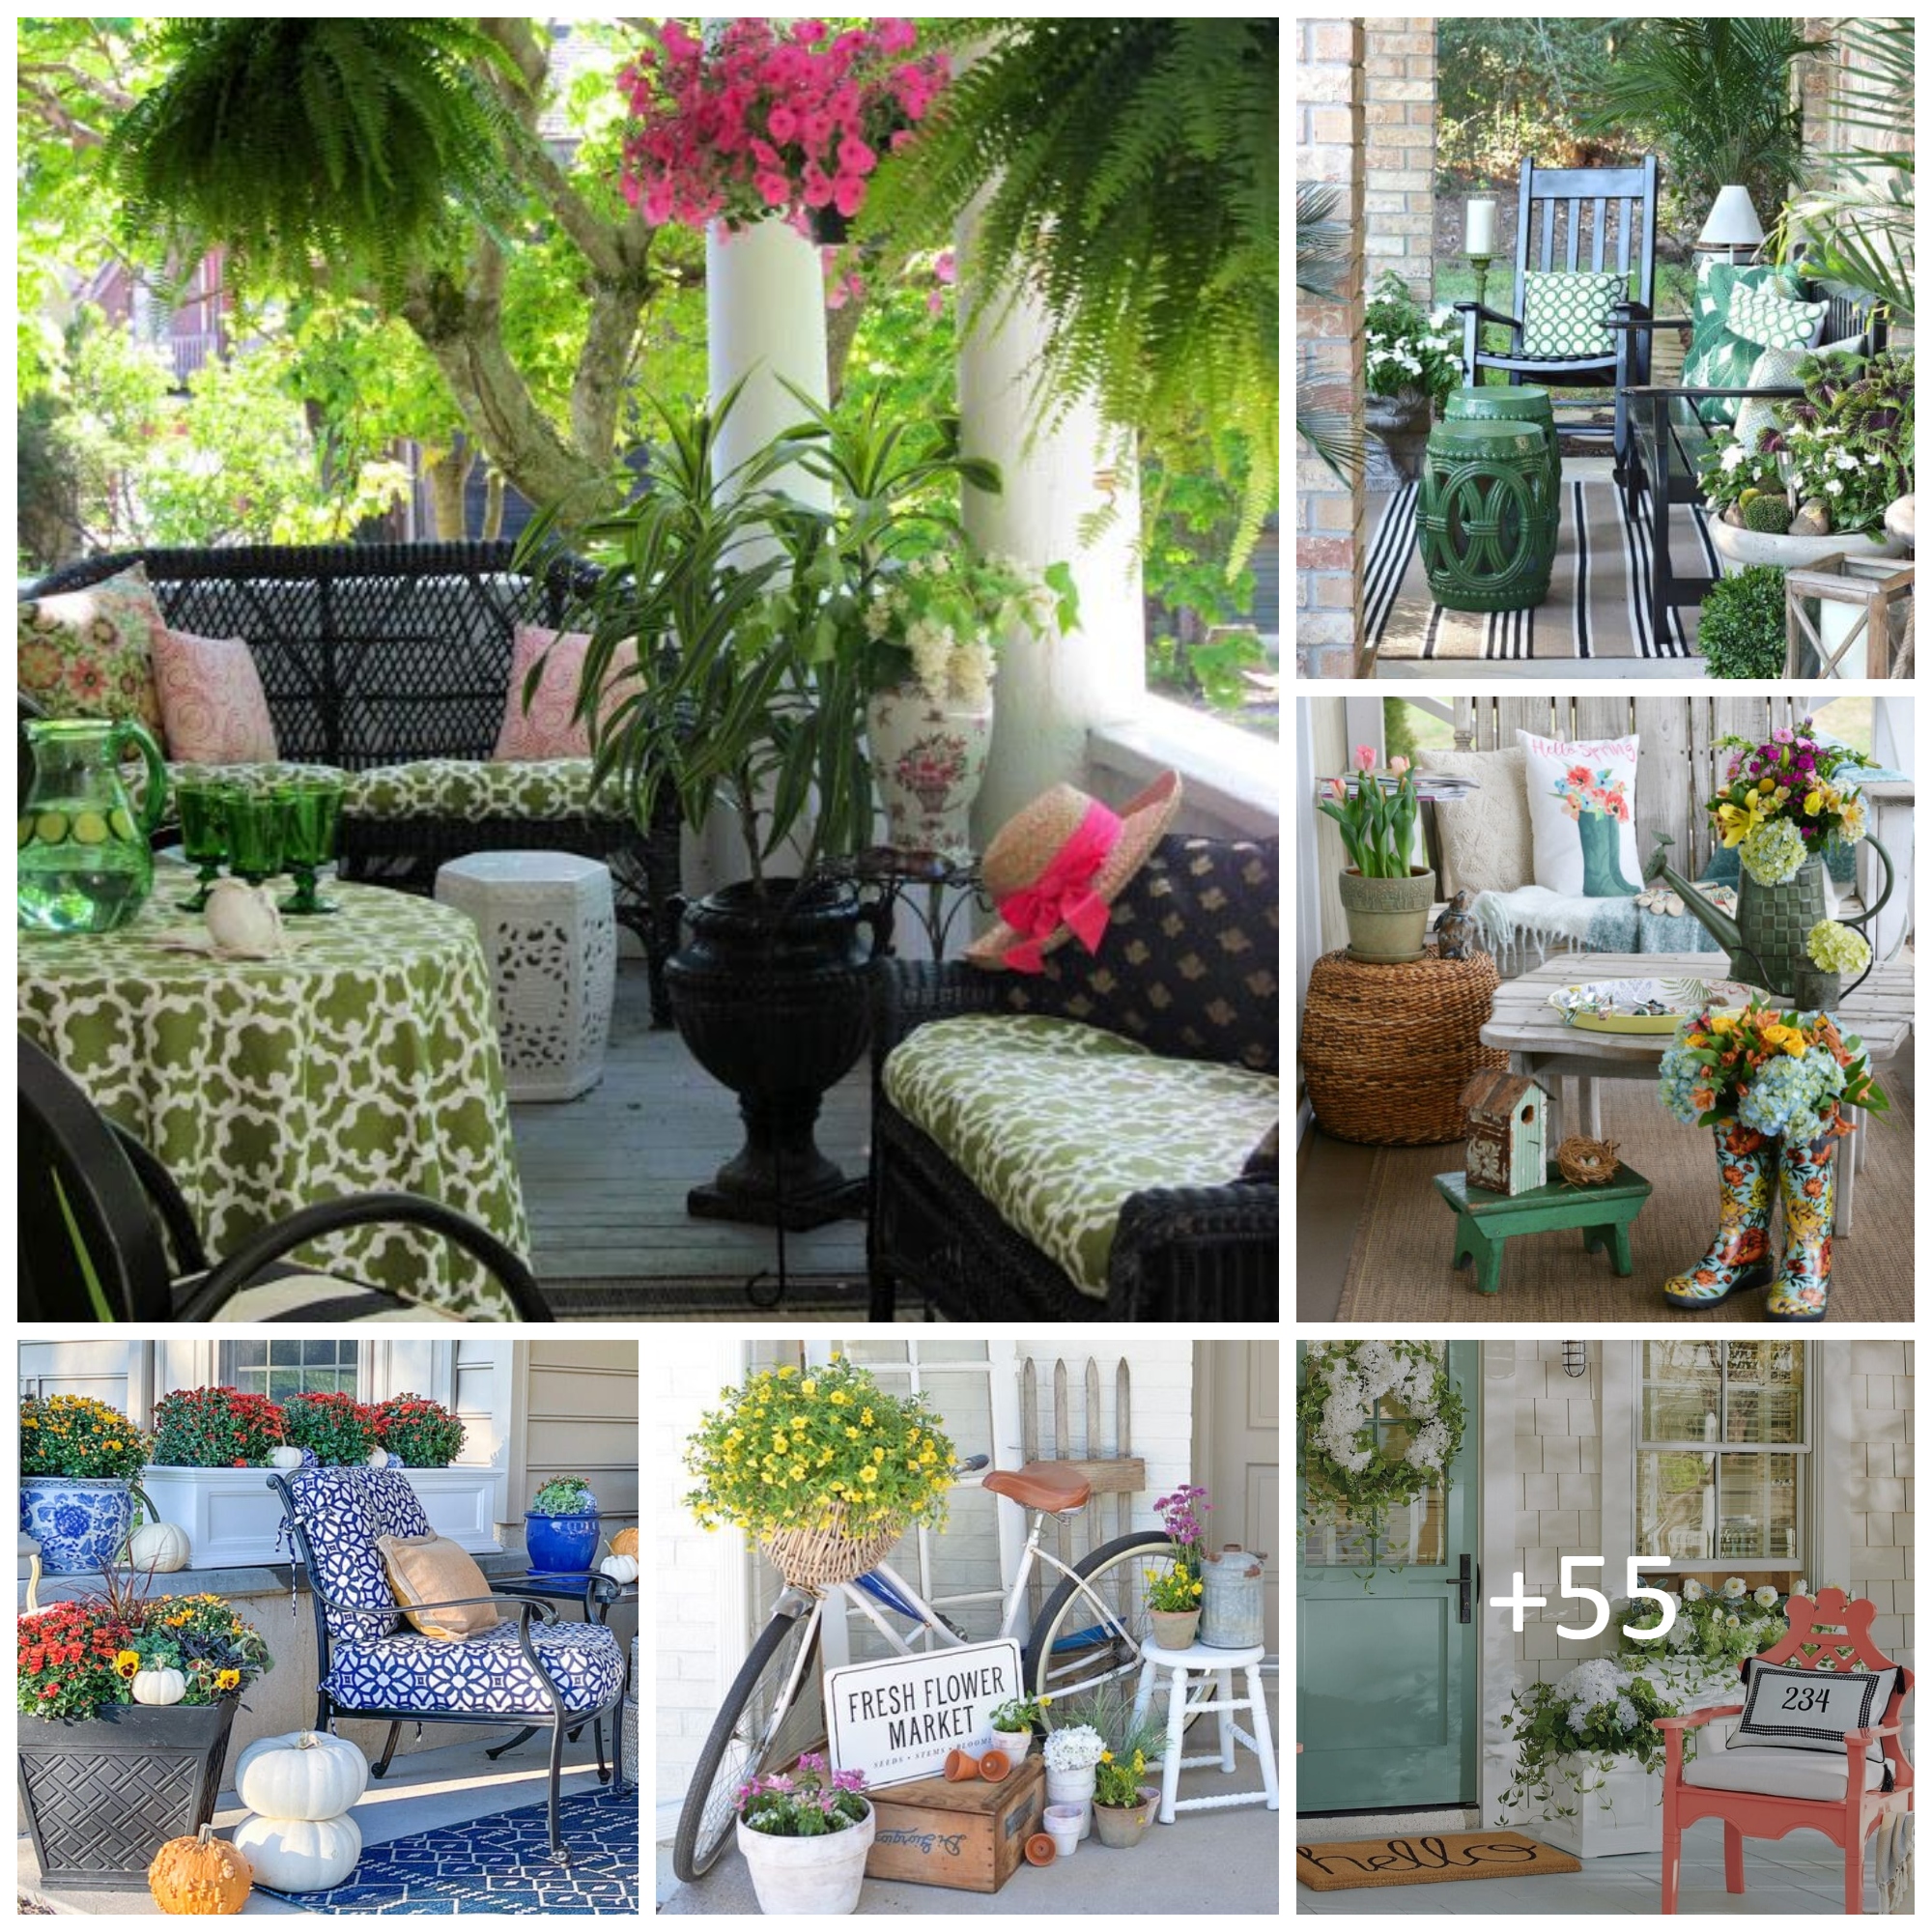 PORCH DECORATING IDEAS FOR SPRING AND SUMMER